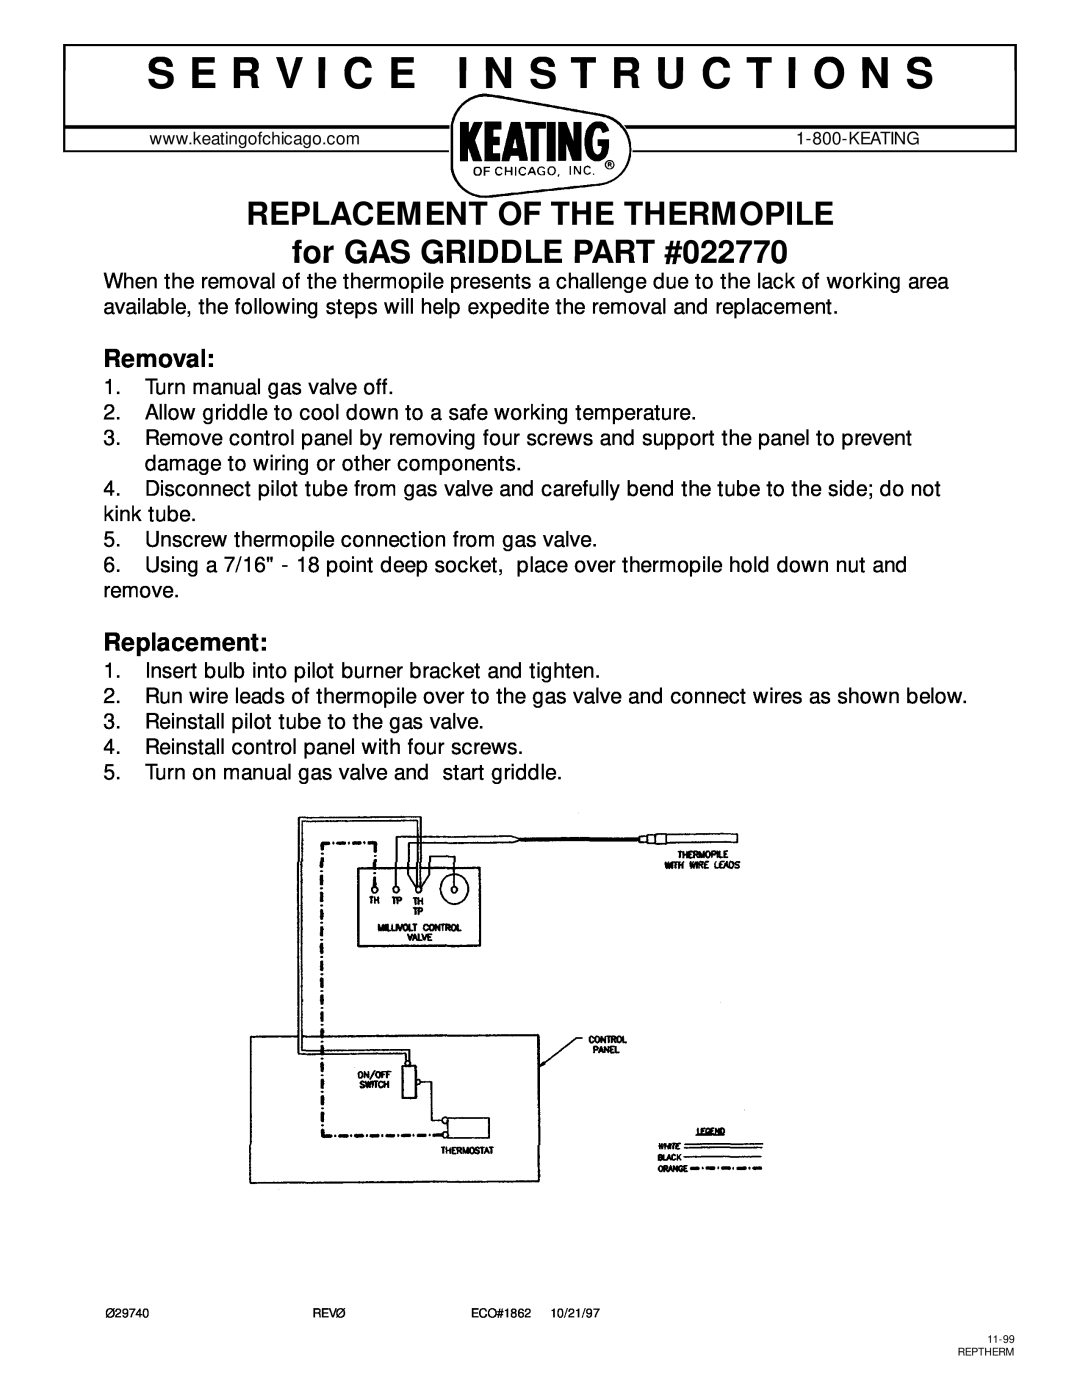 Keating Of Chicago 022770 manual S E R V I C E I N S T R U C T I O N S, Replacement Of The Thermopile, Removal 